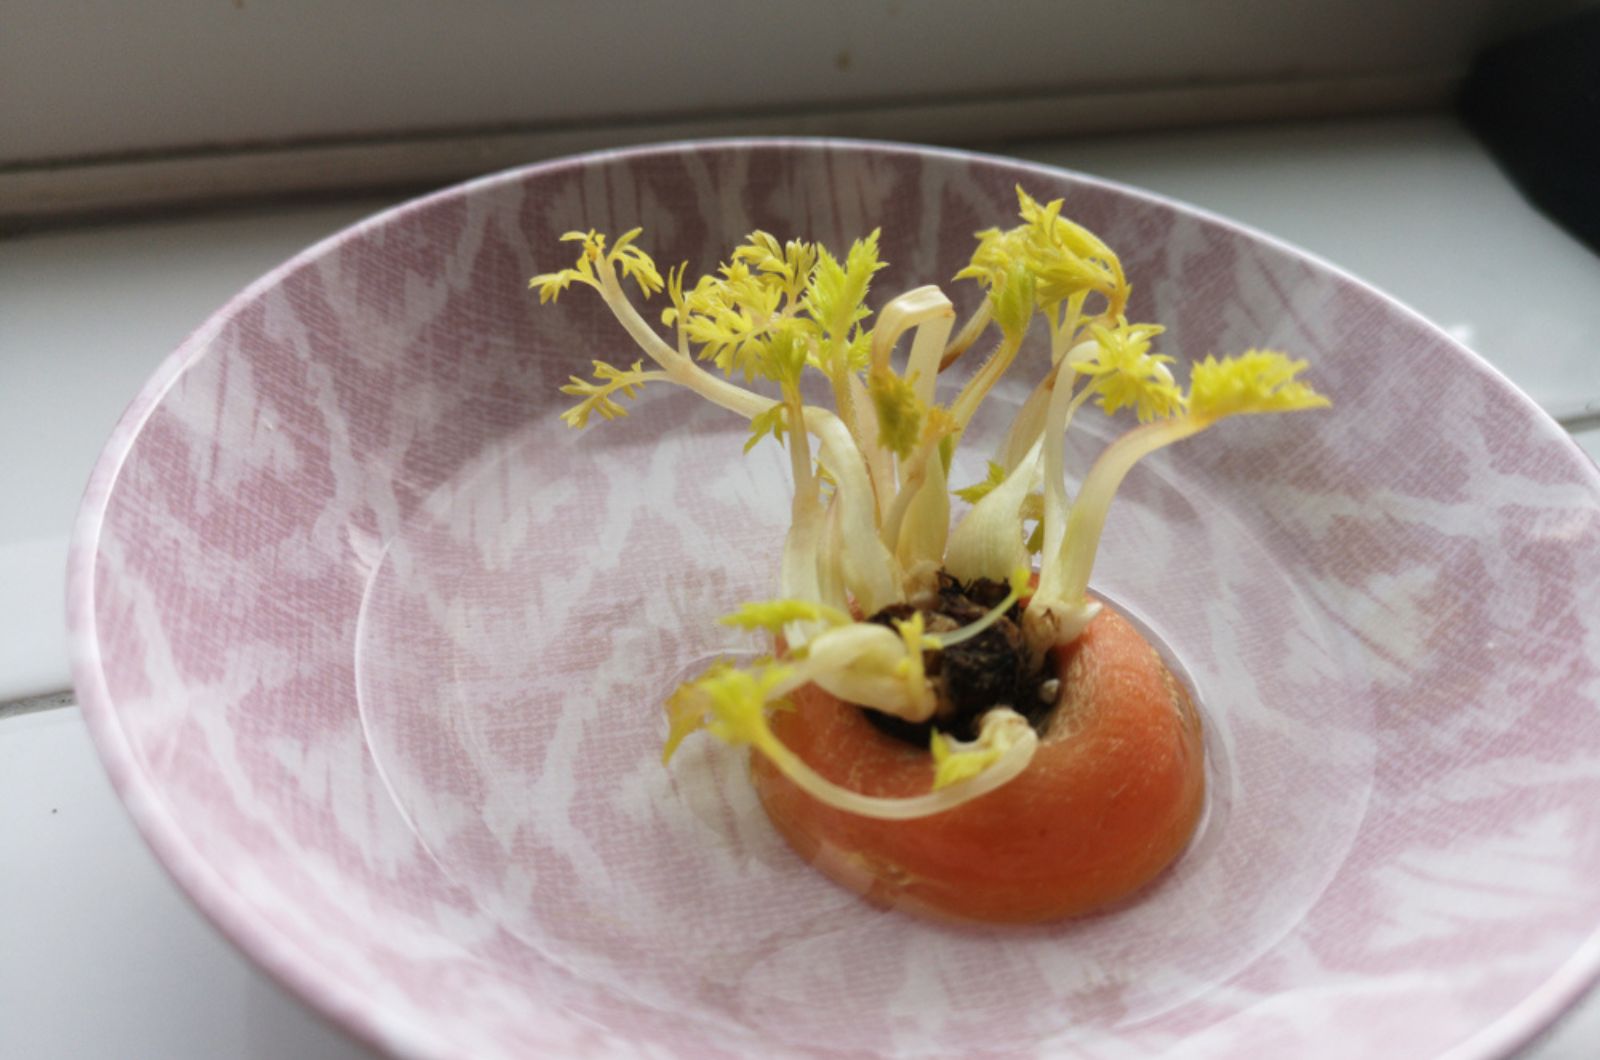 A carrot top in a dish of water sprouting new leaves